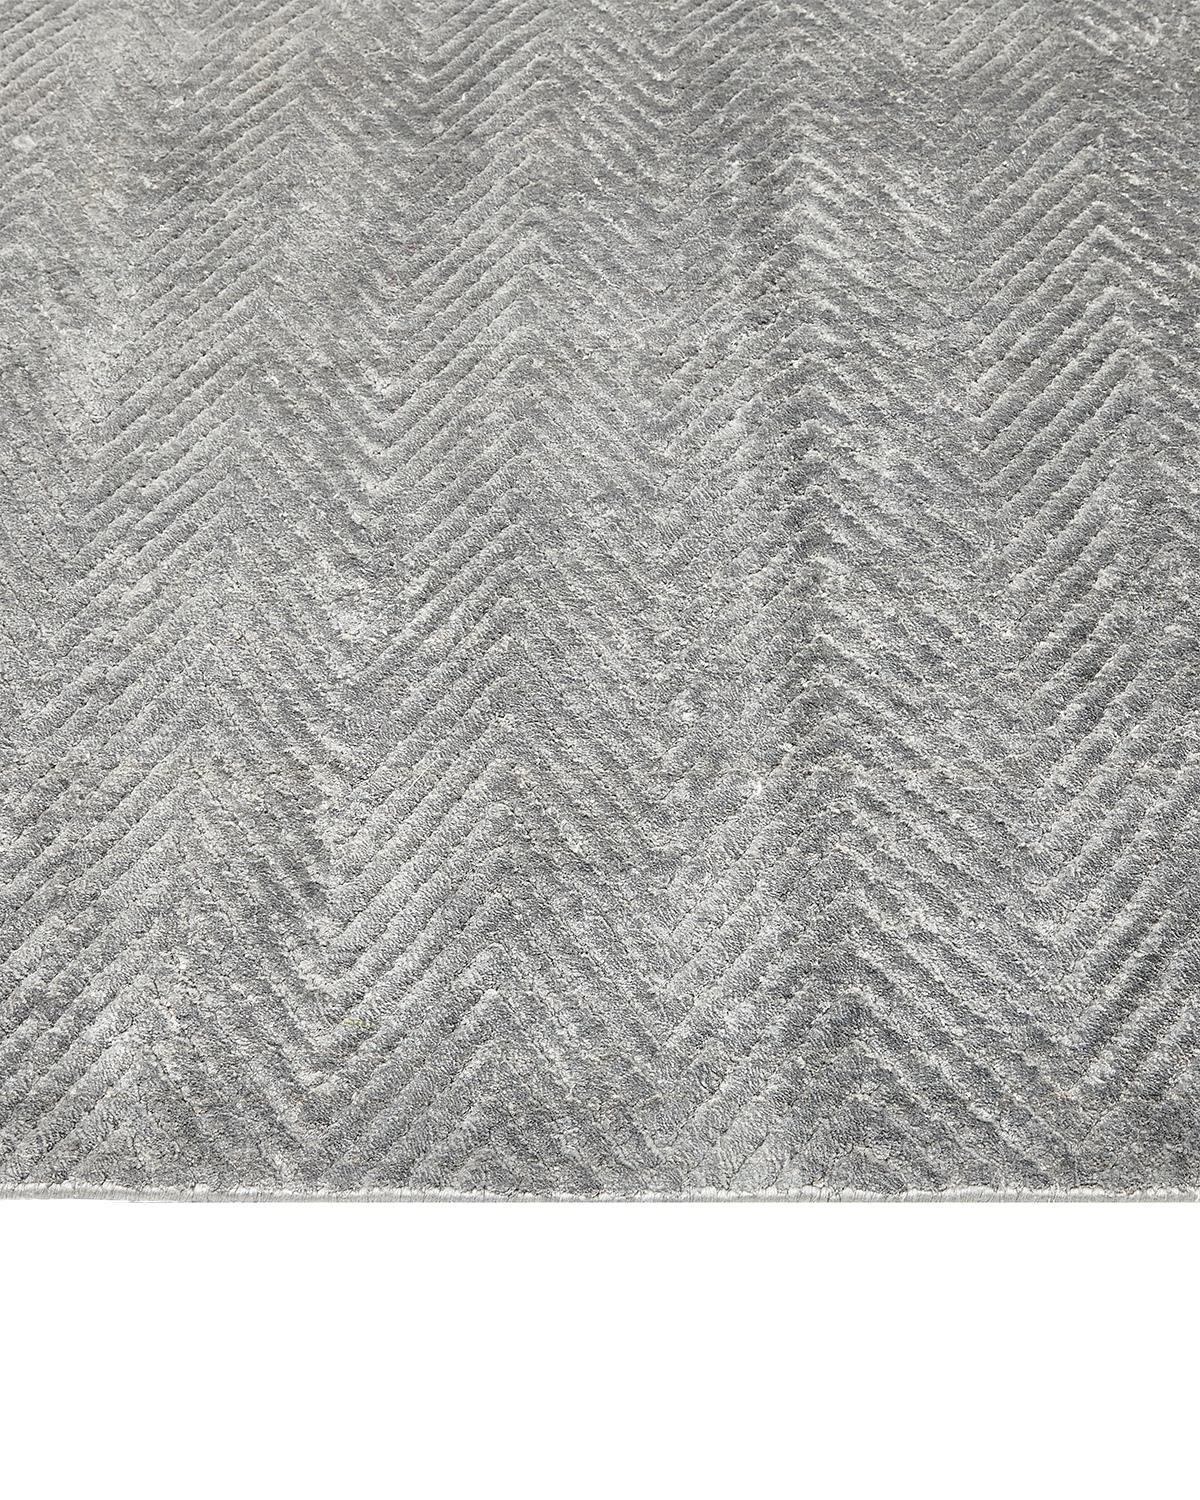 Indian Solo Rugs Modern Chevron Hand Loomed Grey Area Rug For Sale